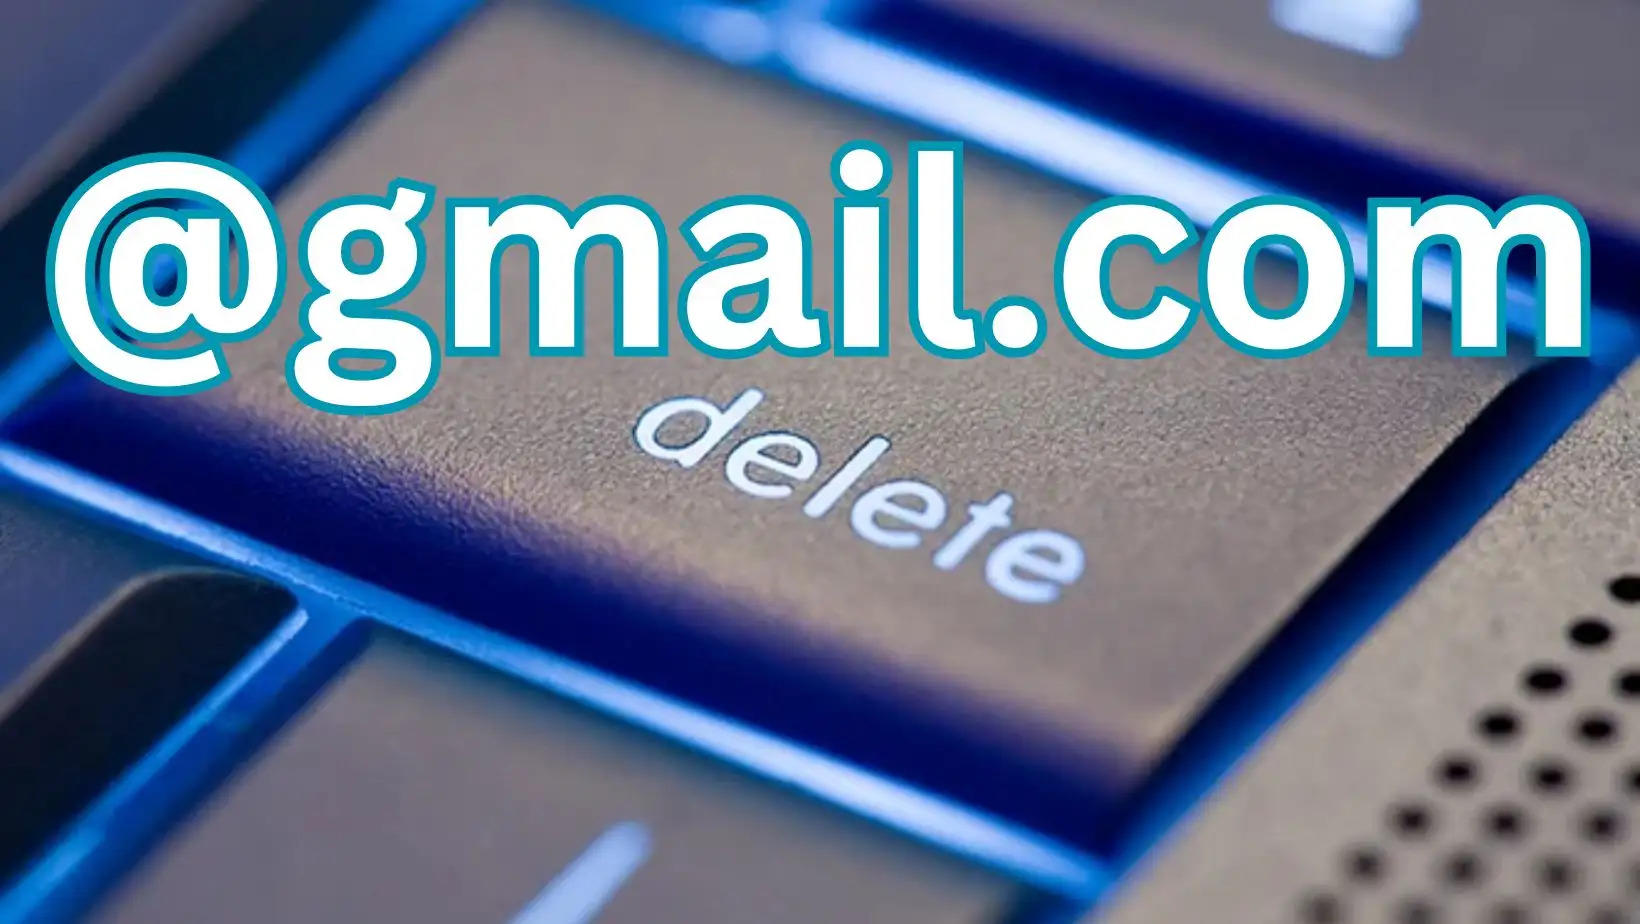 Google will Delete Accounts from 1 December - Check the Policy and be cautious